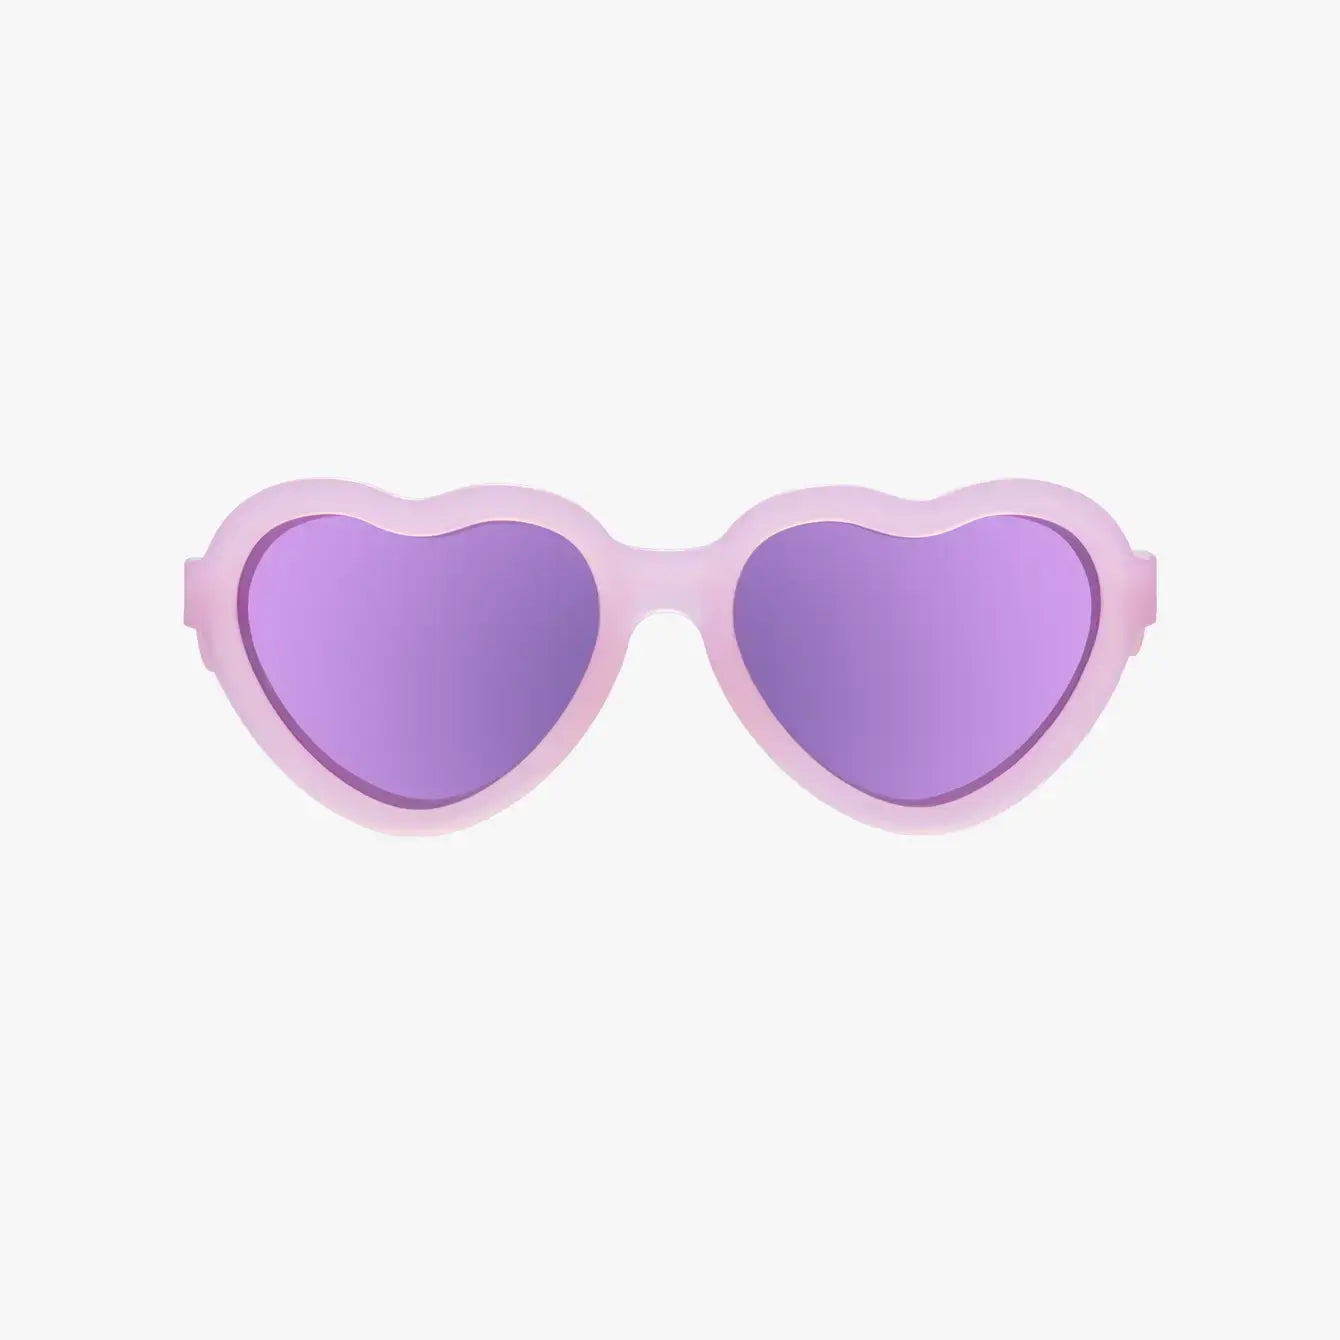 Babiators - Polarized Heart Sunglasses: Ages 3-5 / Frosted Pink